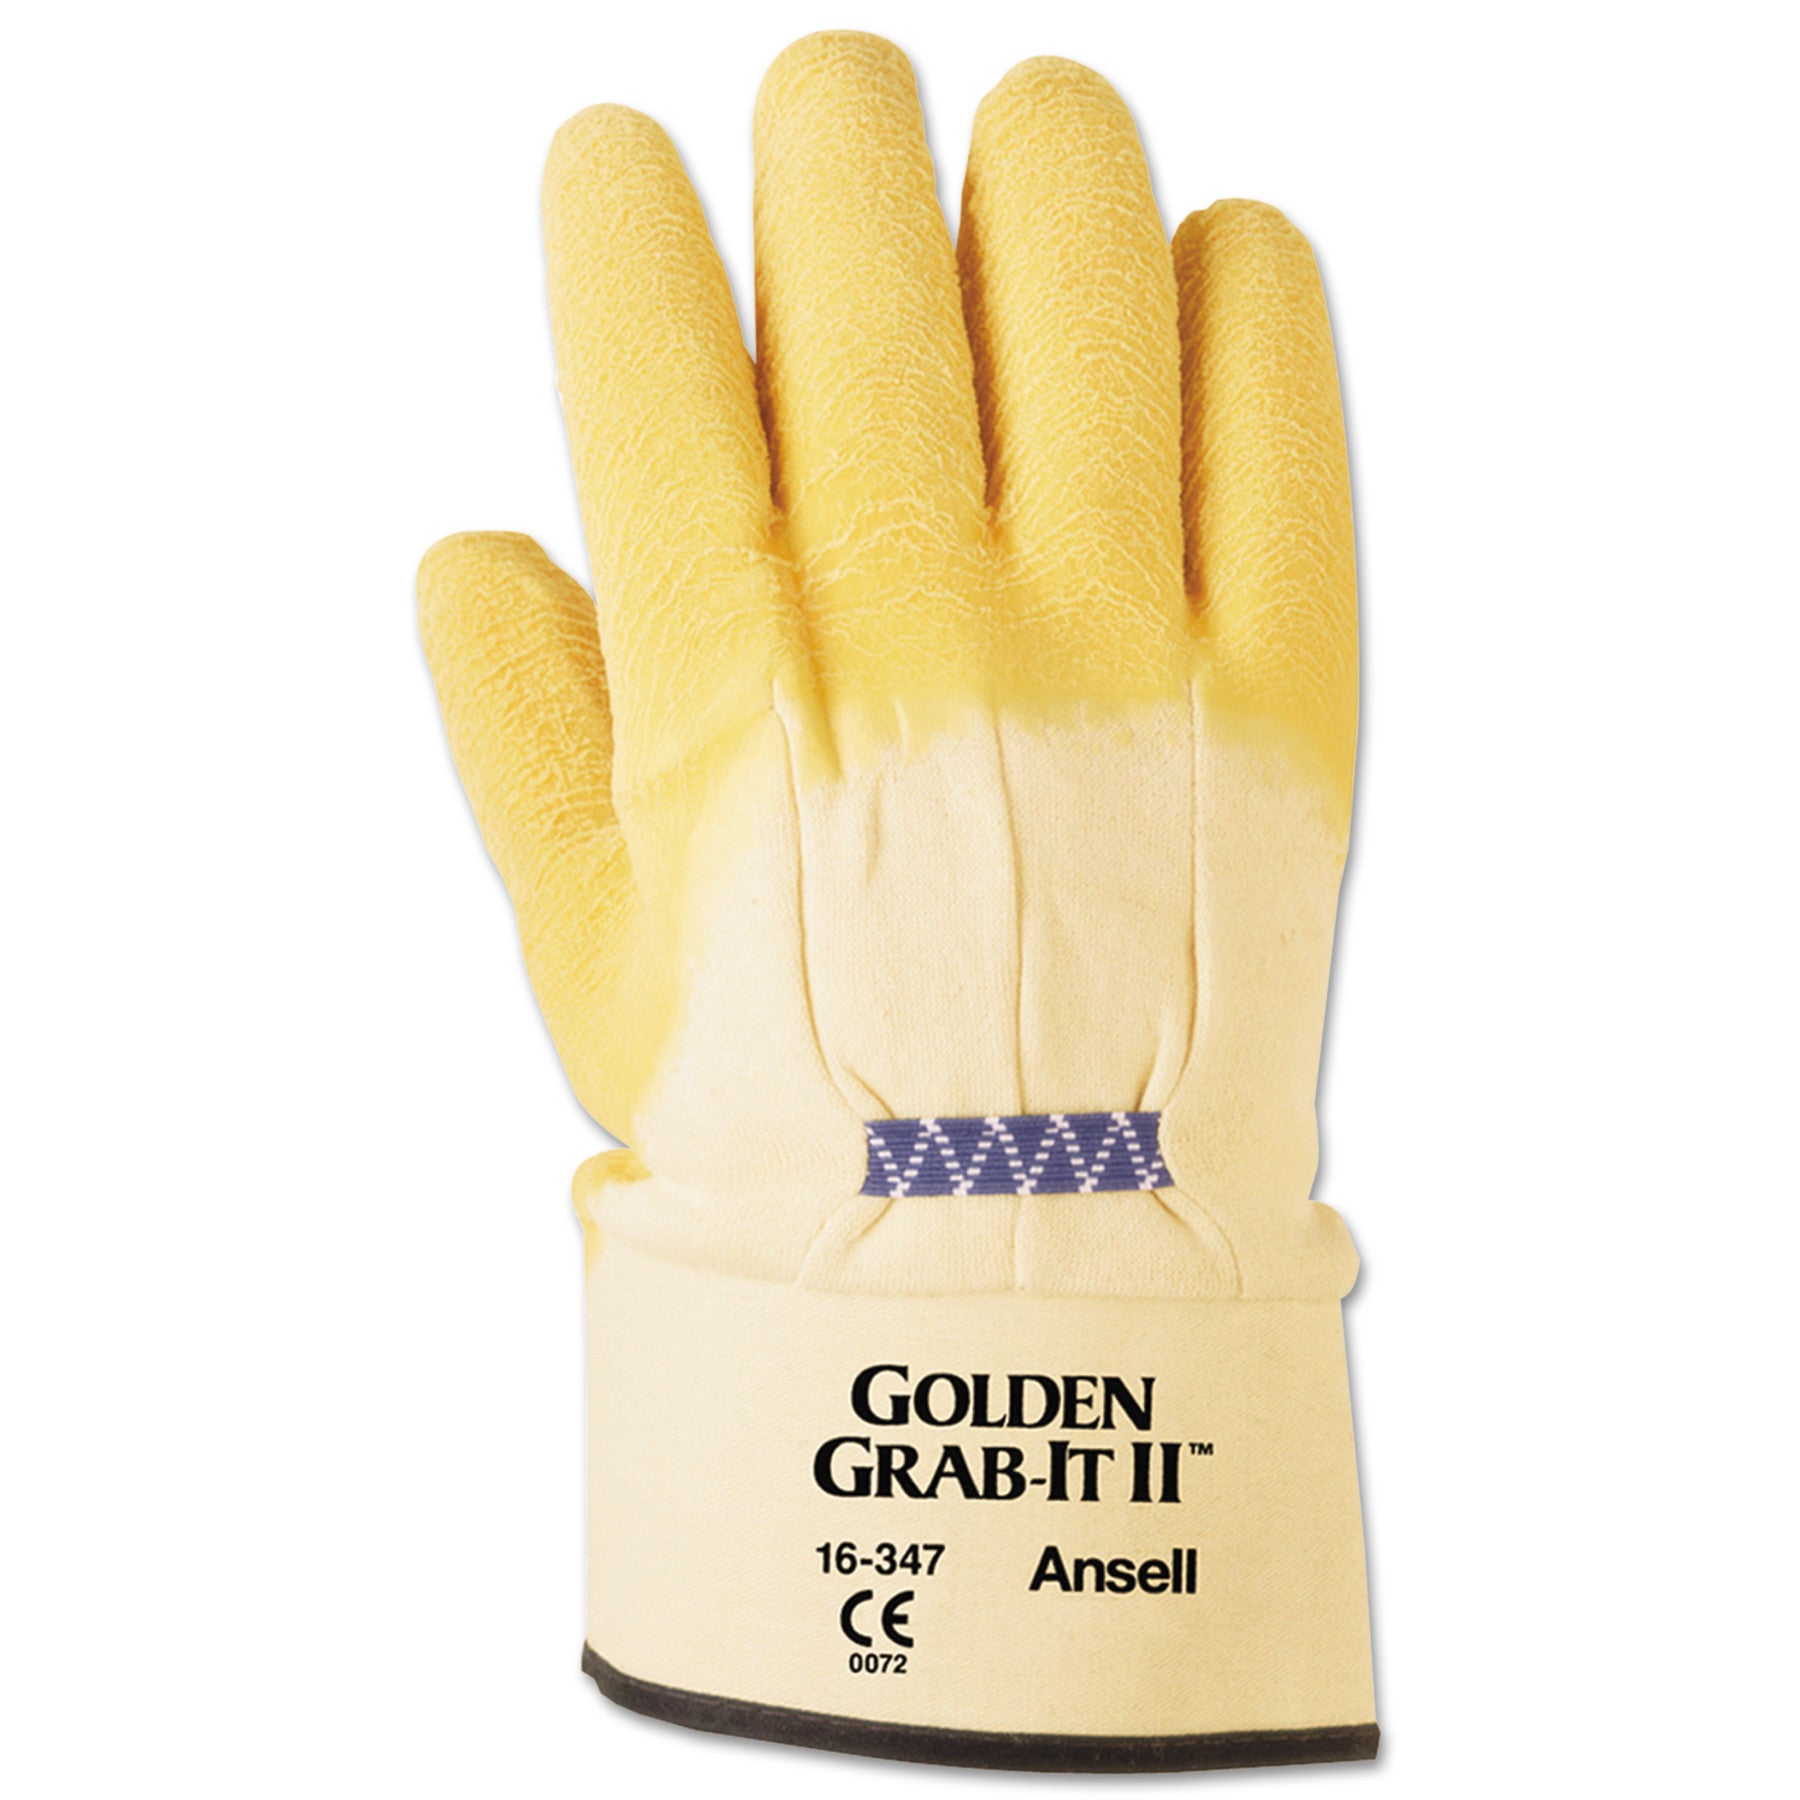 golden-grab-it-ii-heavy-duty-work-gloves-size-10-latex-jersey-yellow-12-pairs_ans1634710 - 1